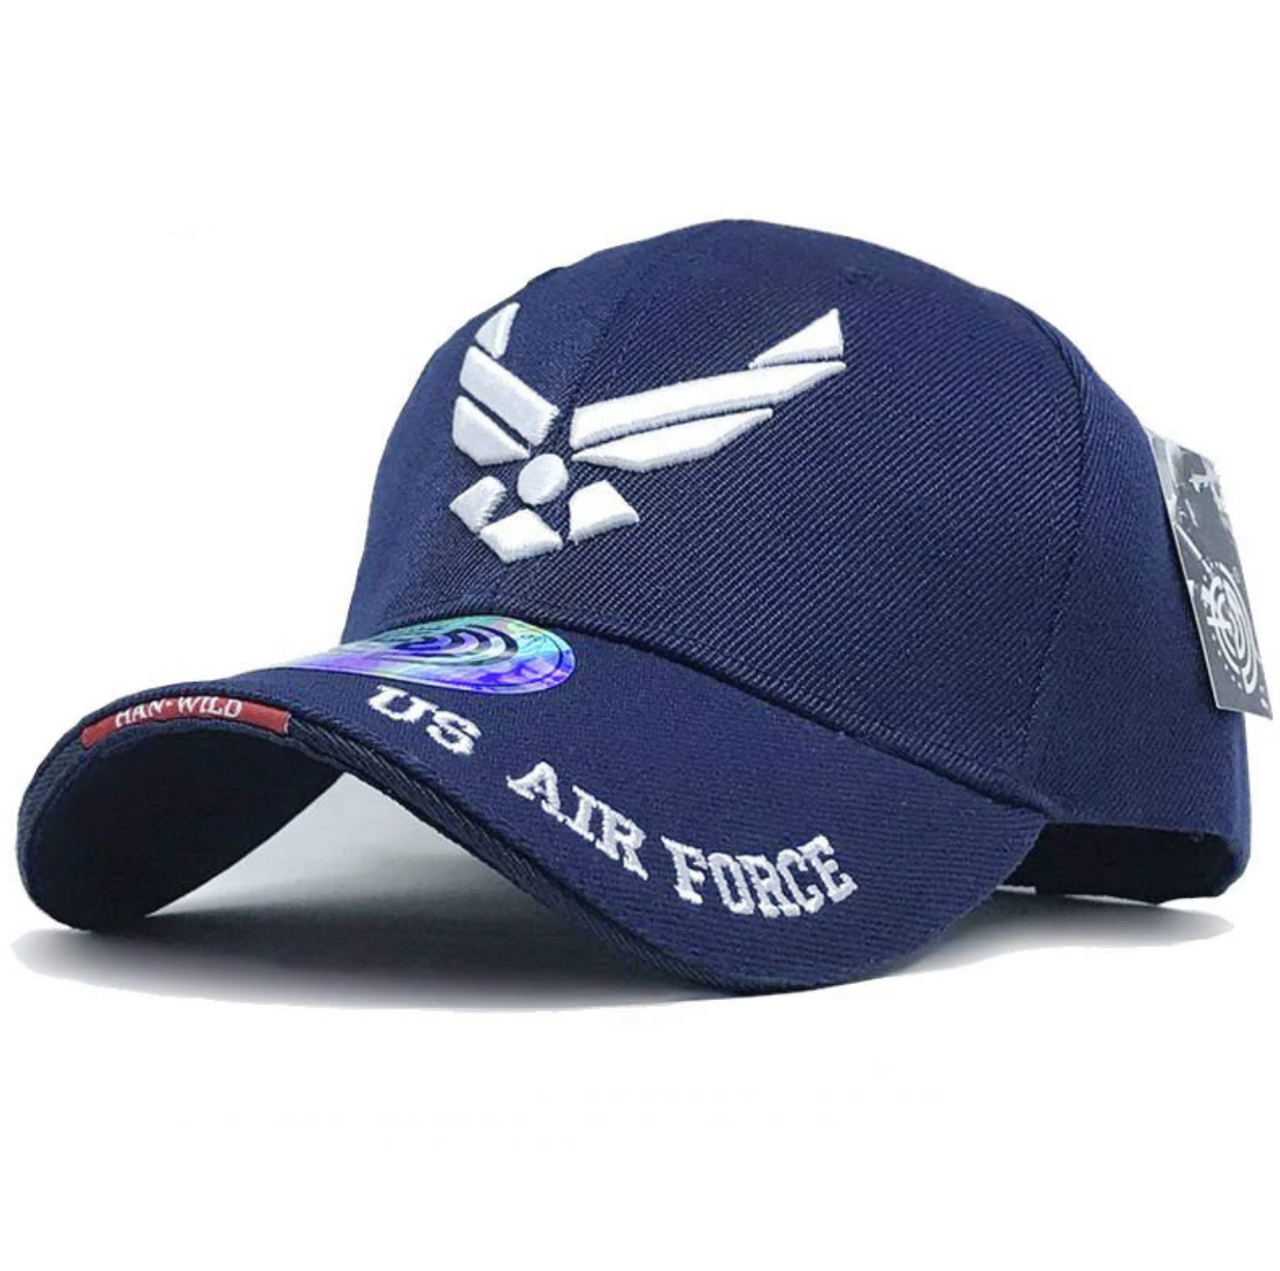 US Air Force Special Operation Designed Hats